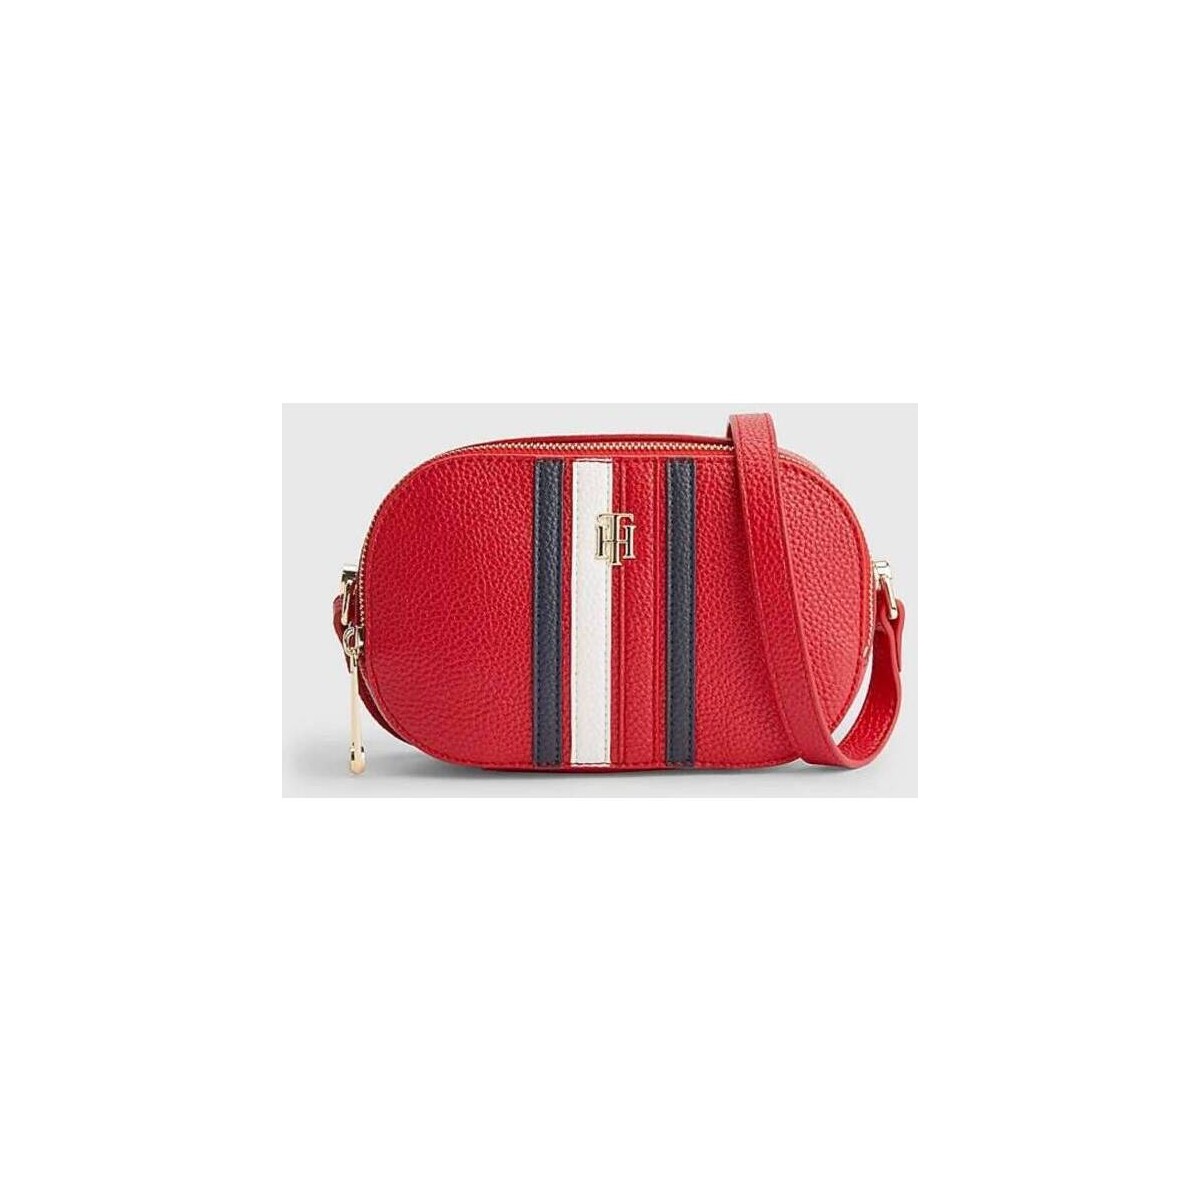 Borse Donna Borse Tommy Hilfiger TOMMY HILFIGER BORSA A TRACOLLA DONNA AW0AW13178 Rosso